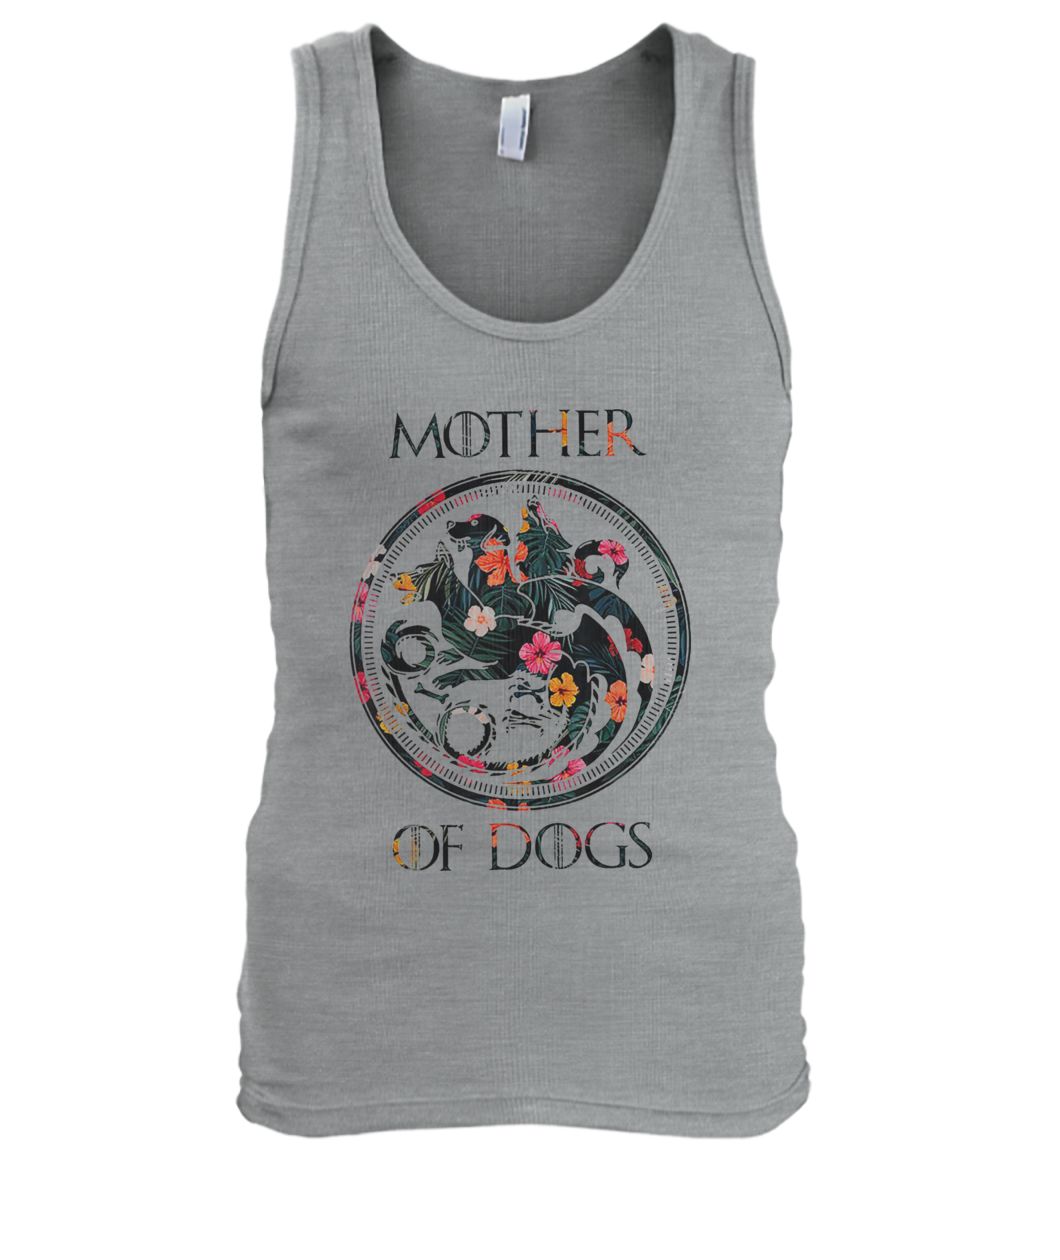 Floral flower game of thrones mother of dogs men's tank top